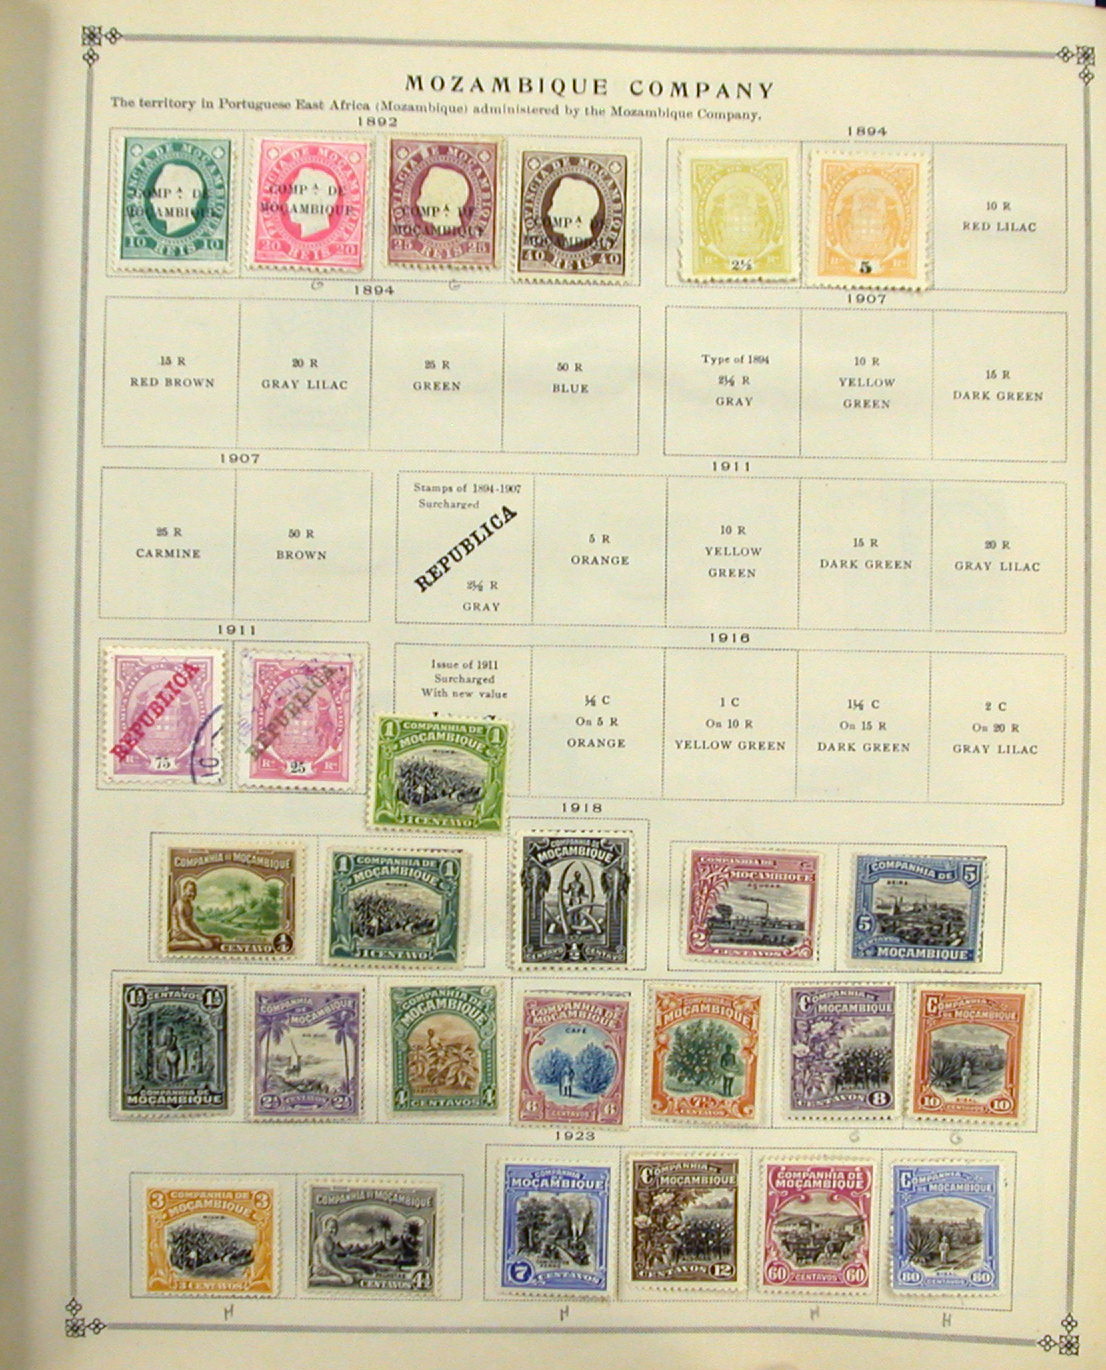 12 Mailing Stamps ideas  stamp collecting, postage stamps, stamp